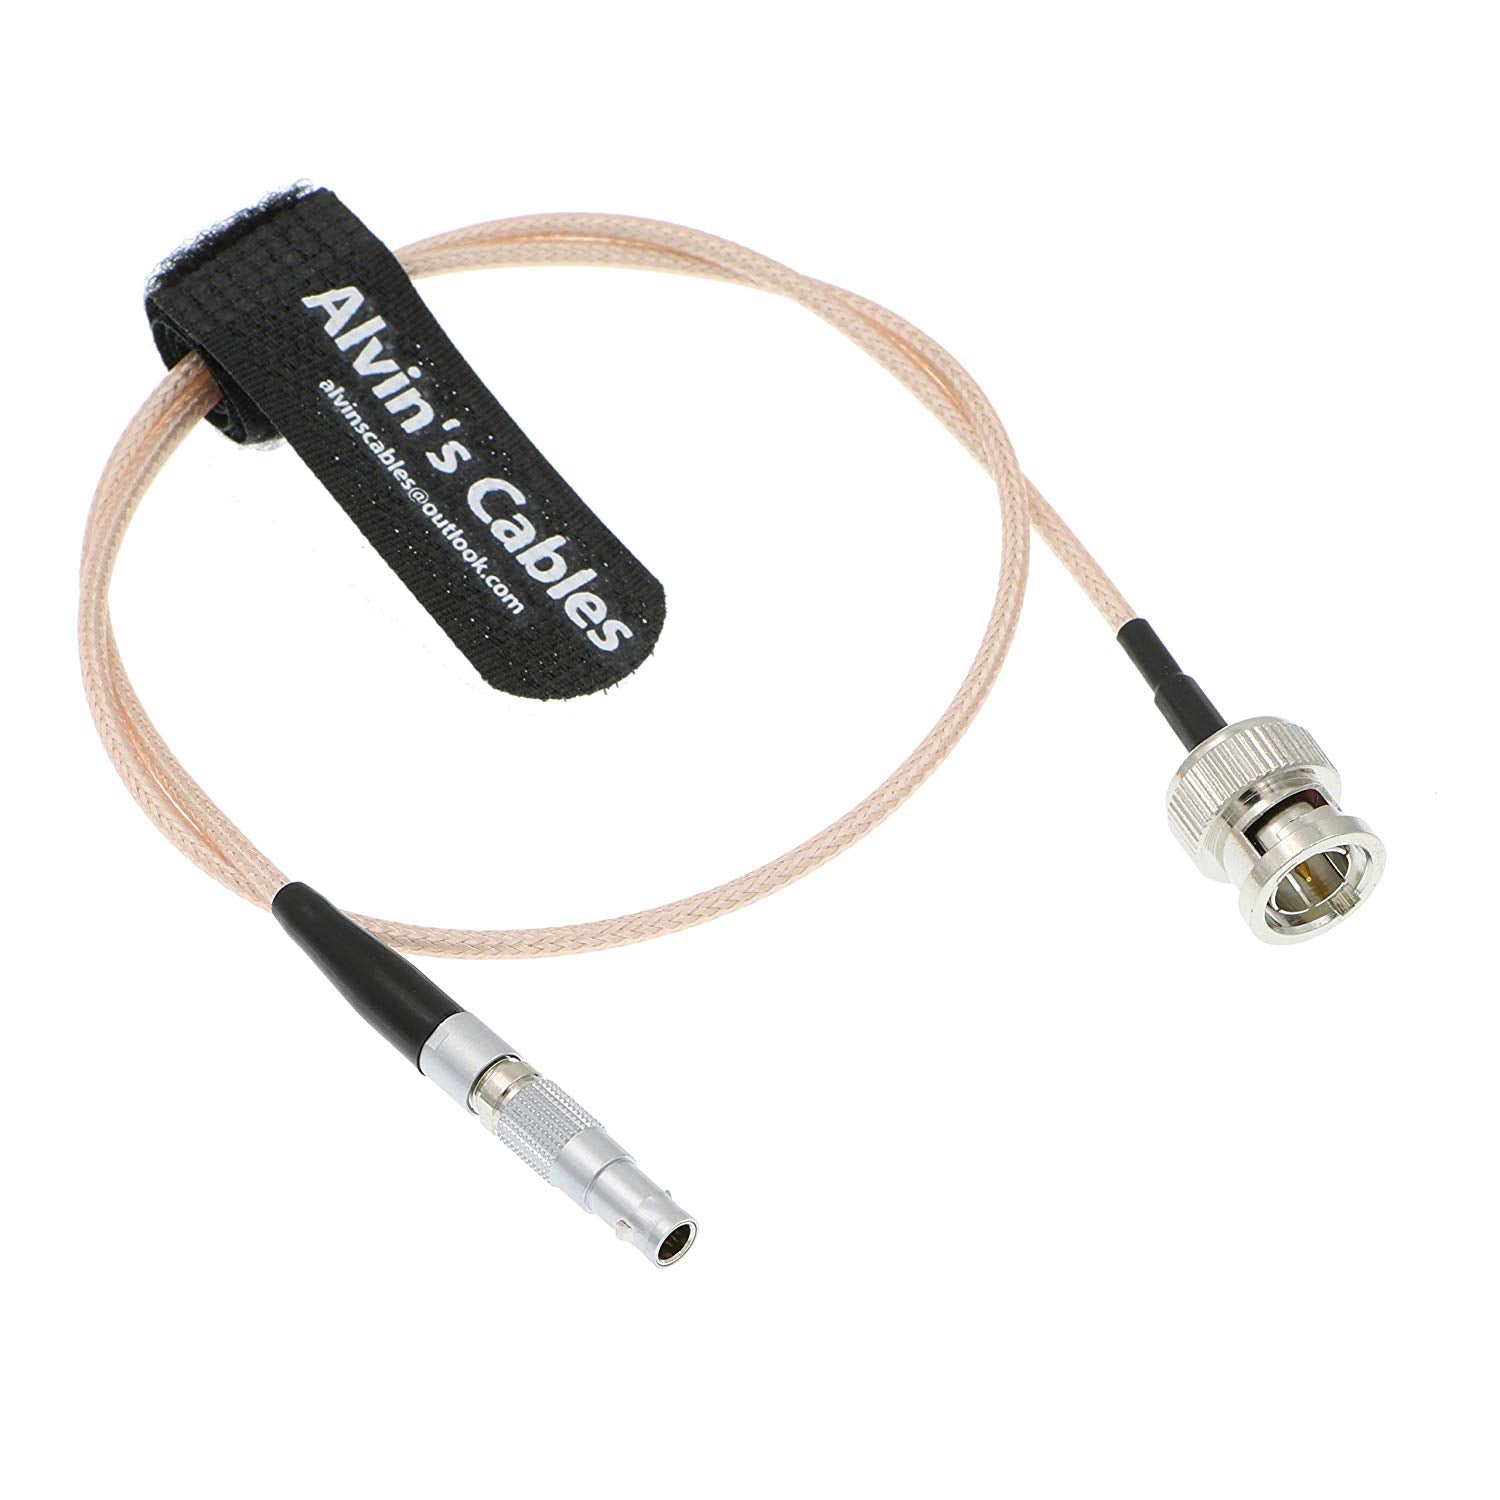 Alvin's Cables Time Code Adapter Cable for Red Epic Scarlet BNC Plug to 4 Pin Male Nor1438 Cable